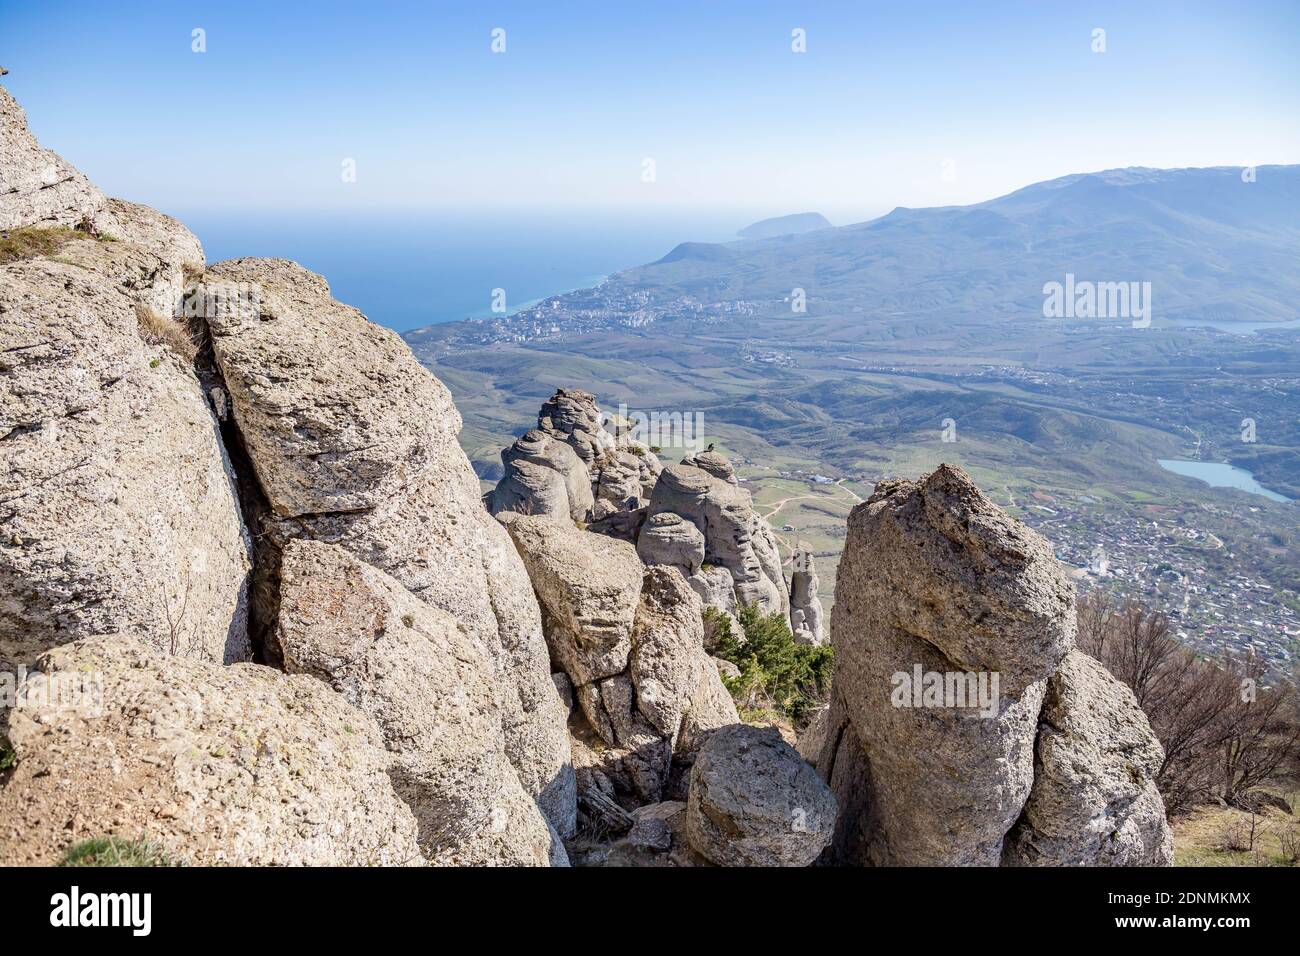 Panoramic View Of Rocks In Mountains Against Sky Stock Photo